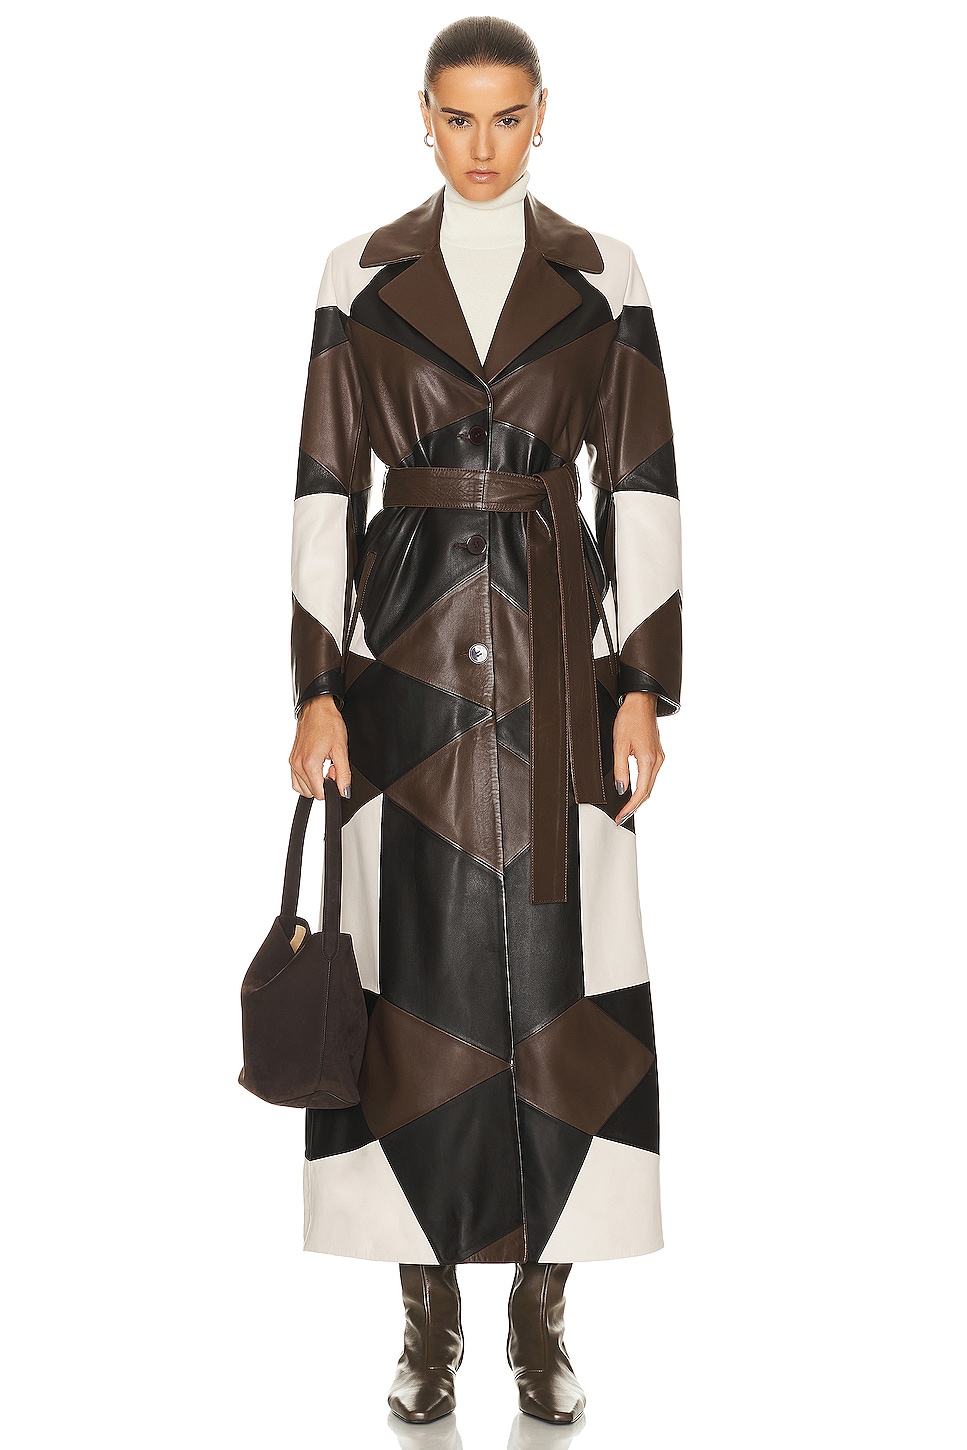 Image 1 of NOUR HAMMOUR Sonja Extra Long Belted Patchwork Trench Coat in Cocoa, Vanilla, & Marron